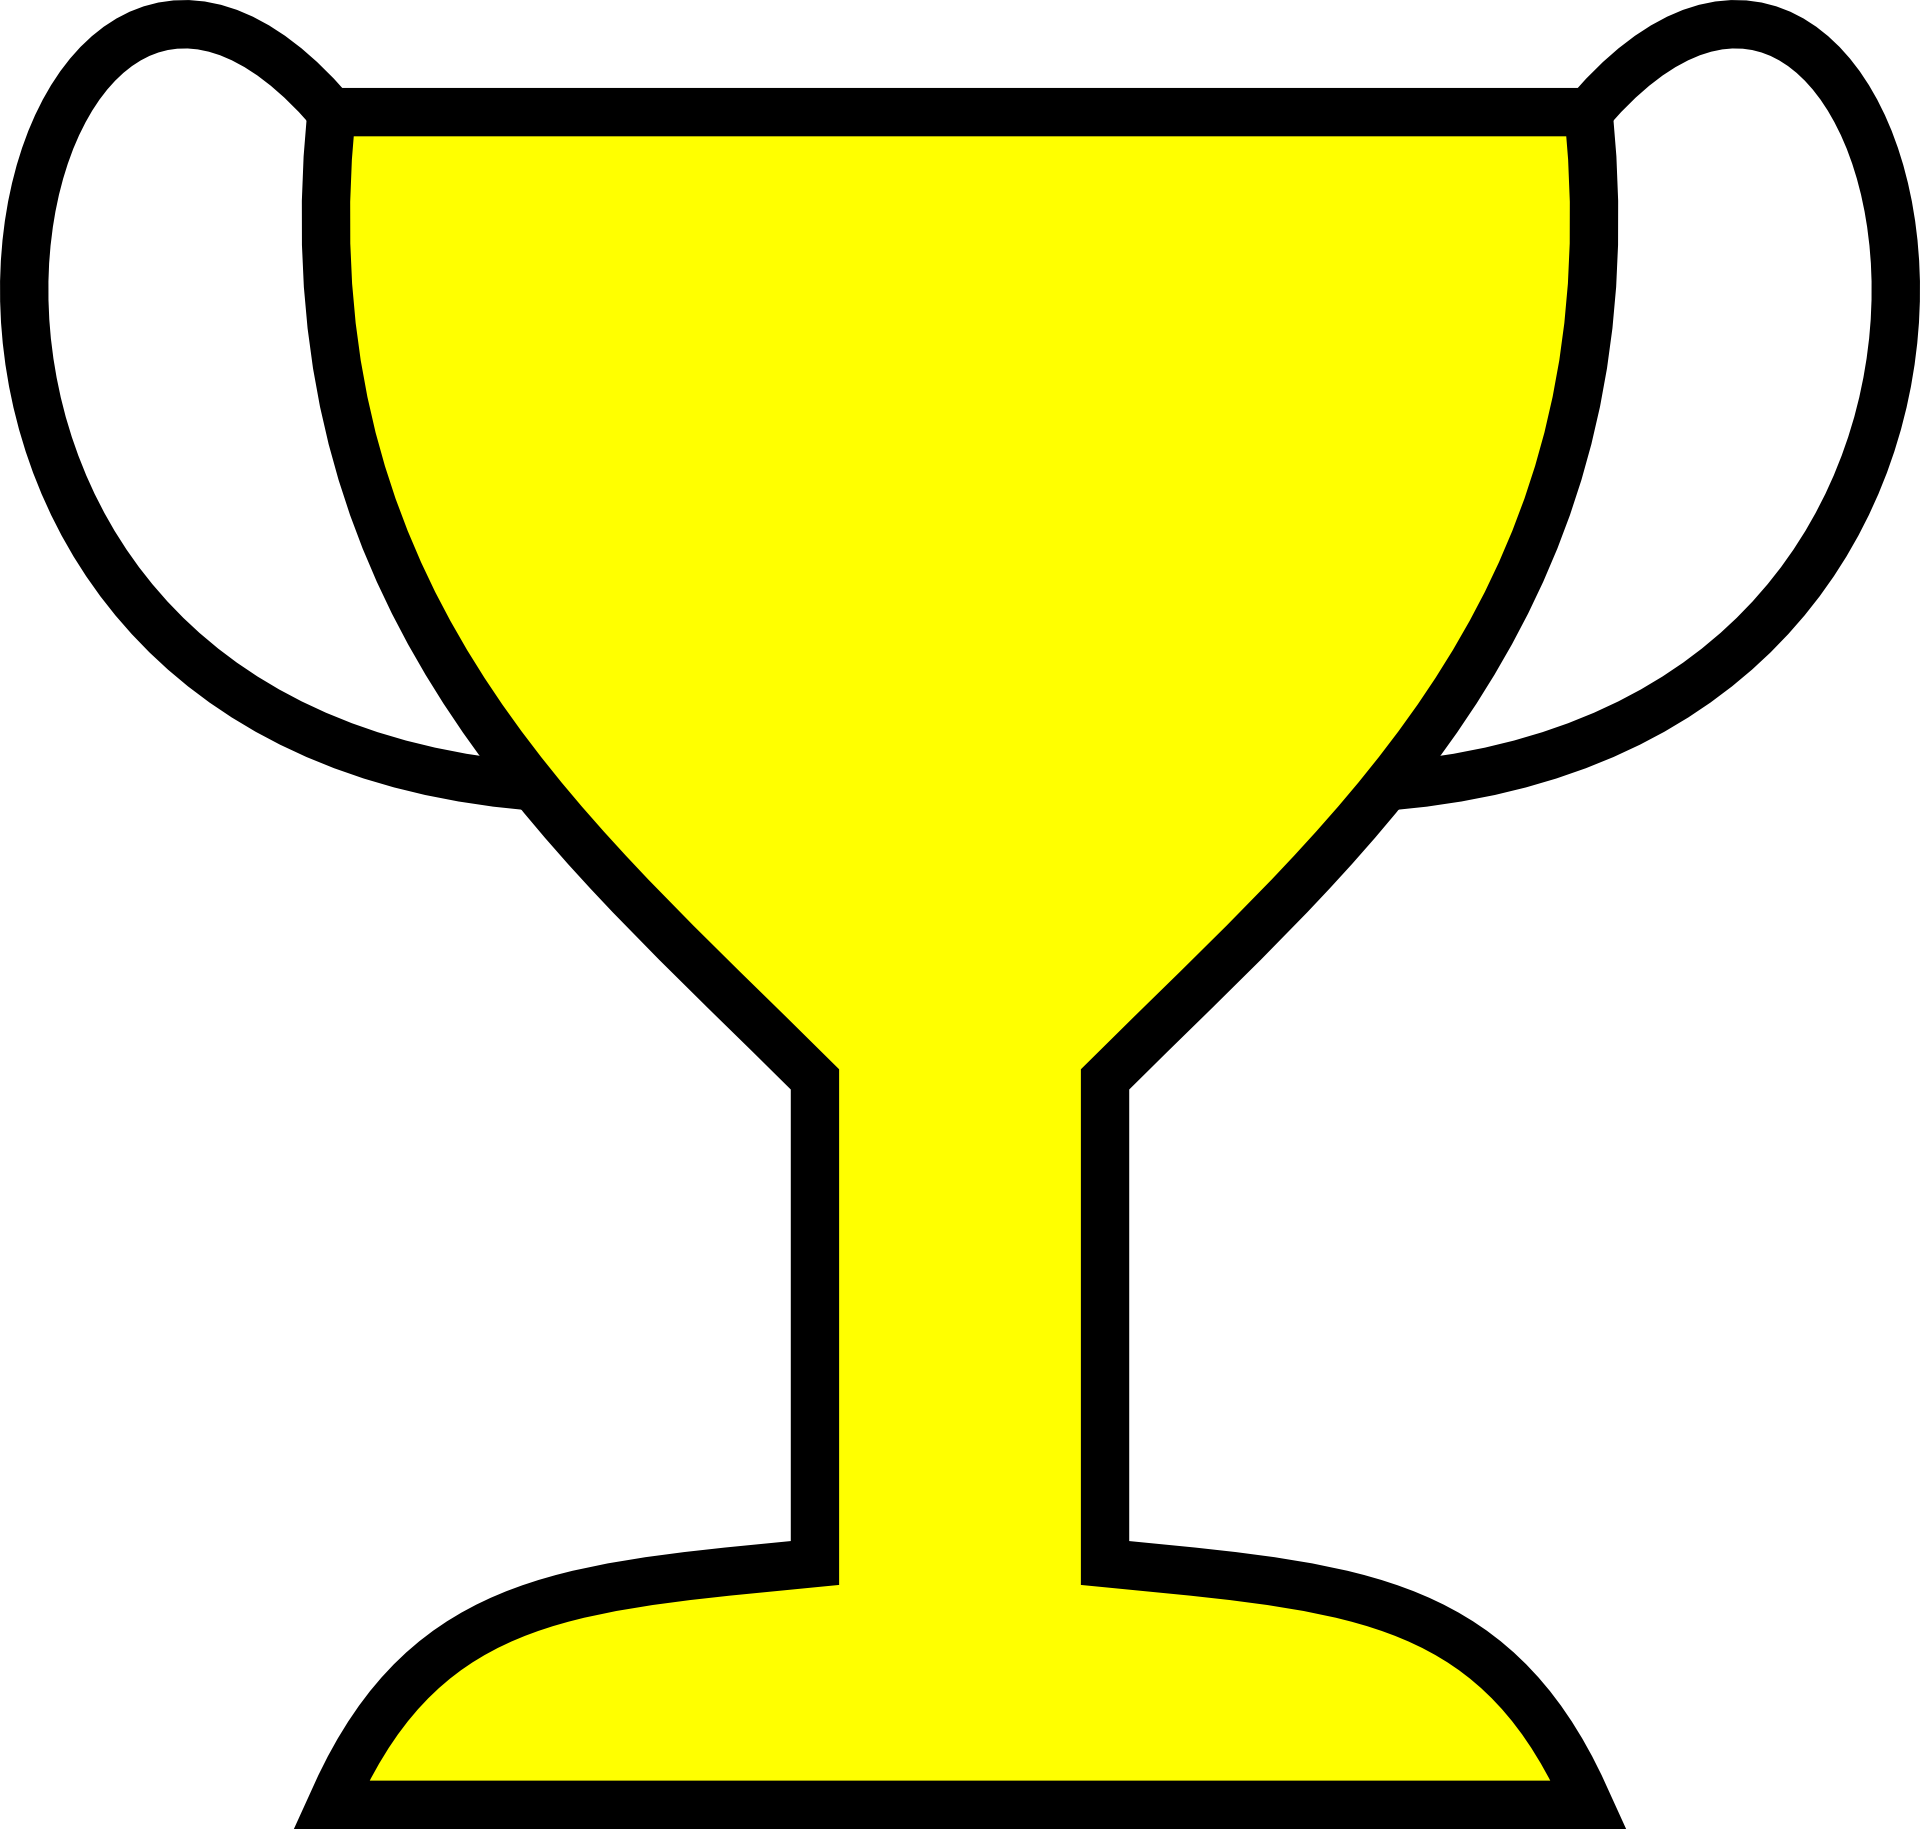 Drawing of a gold cup free image download